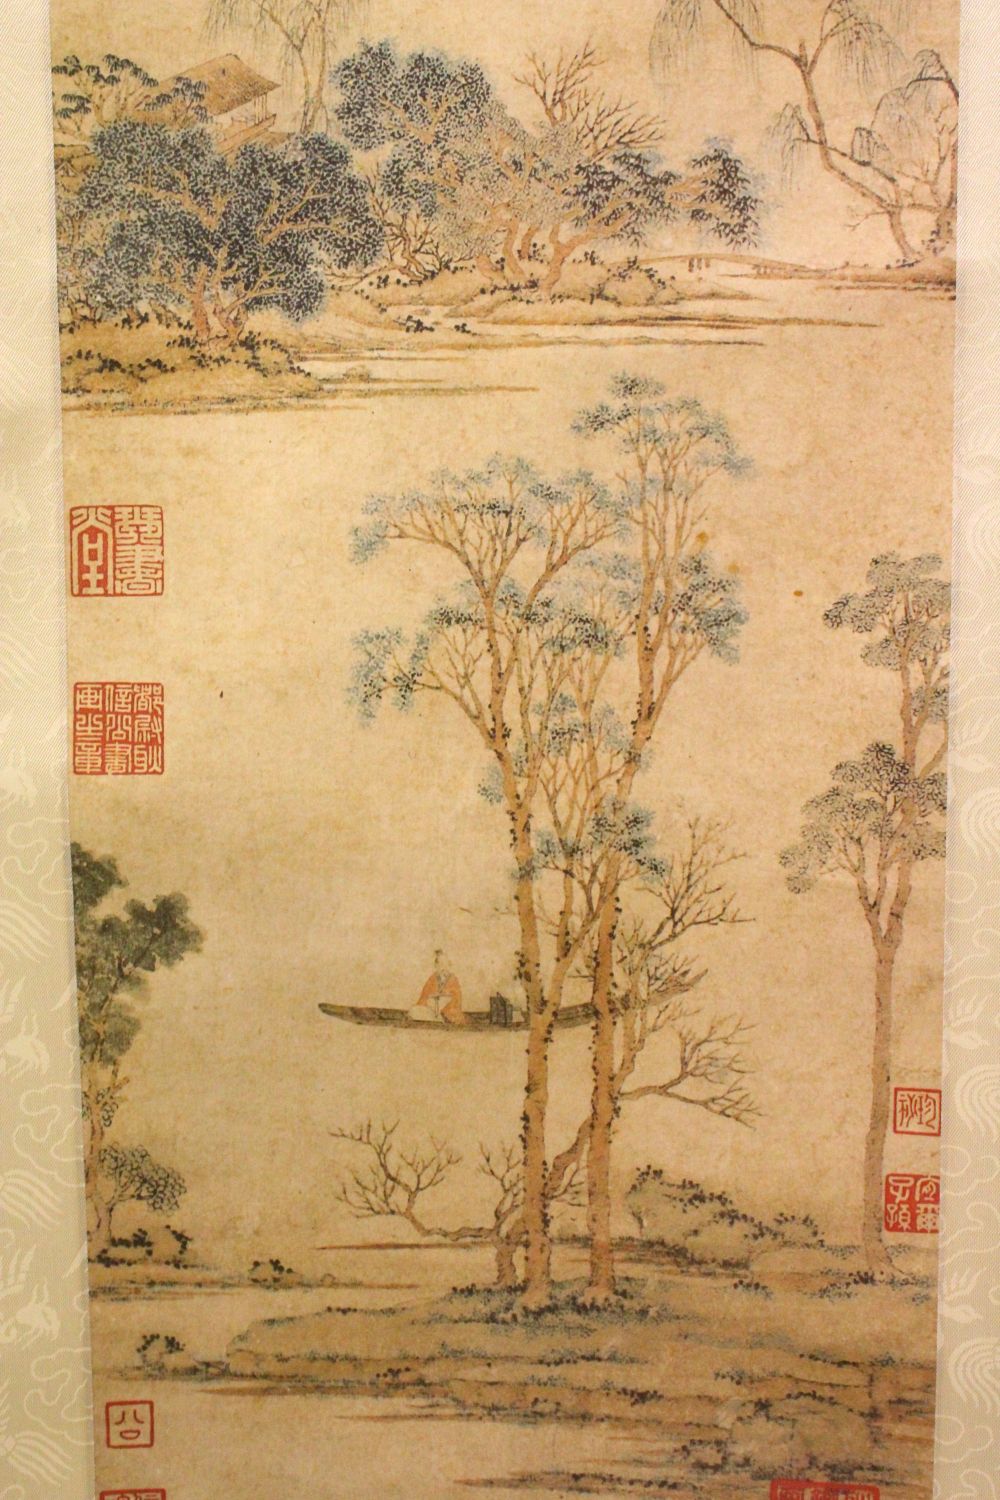 A GOOD CHINESE HANGING SCROLL PRINT OF A LANDSCAPE, the scroll with a detailed view of a - Image 2 of 6